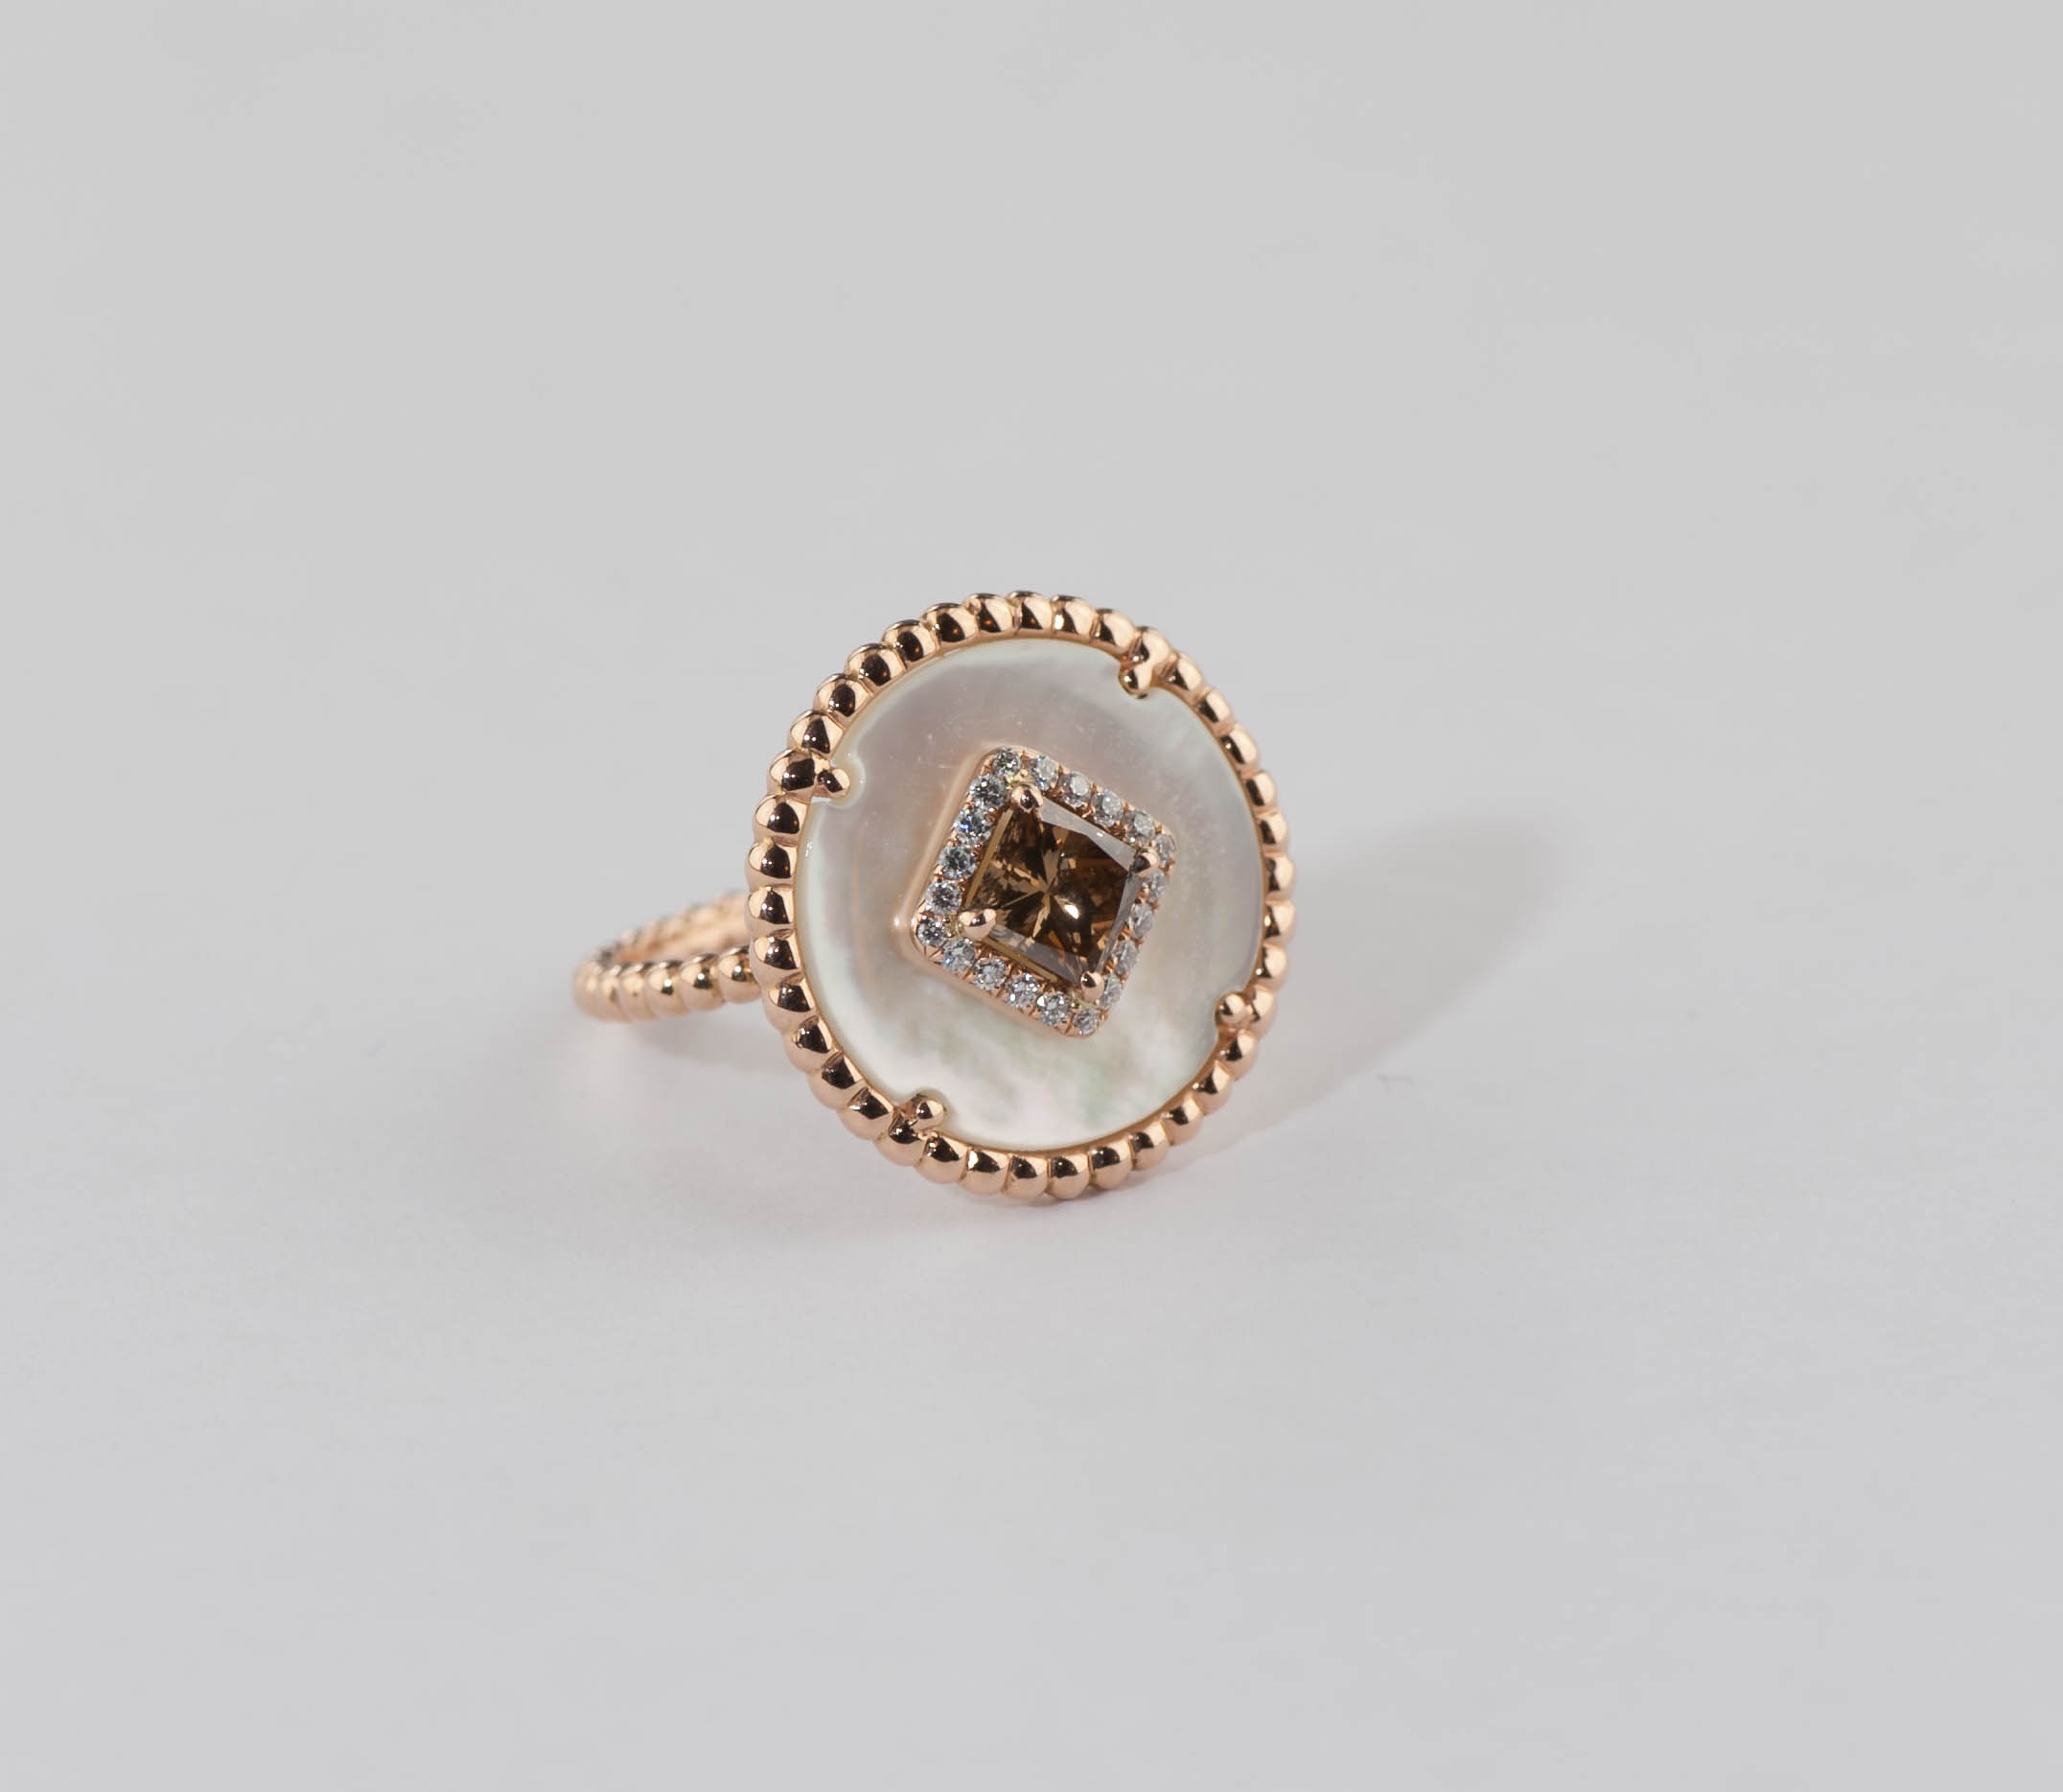 Brown diamond, mother of pearl and colorless diamonds ring.